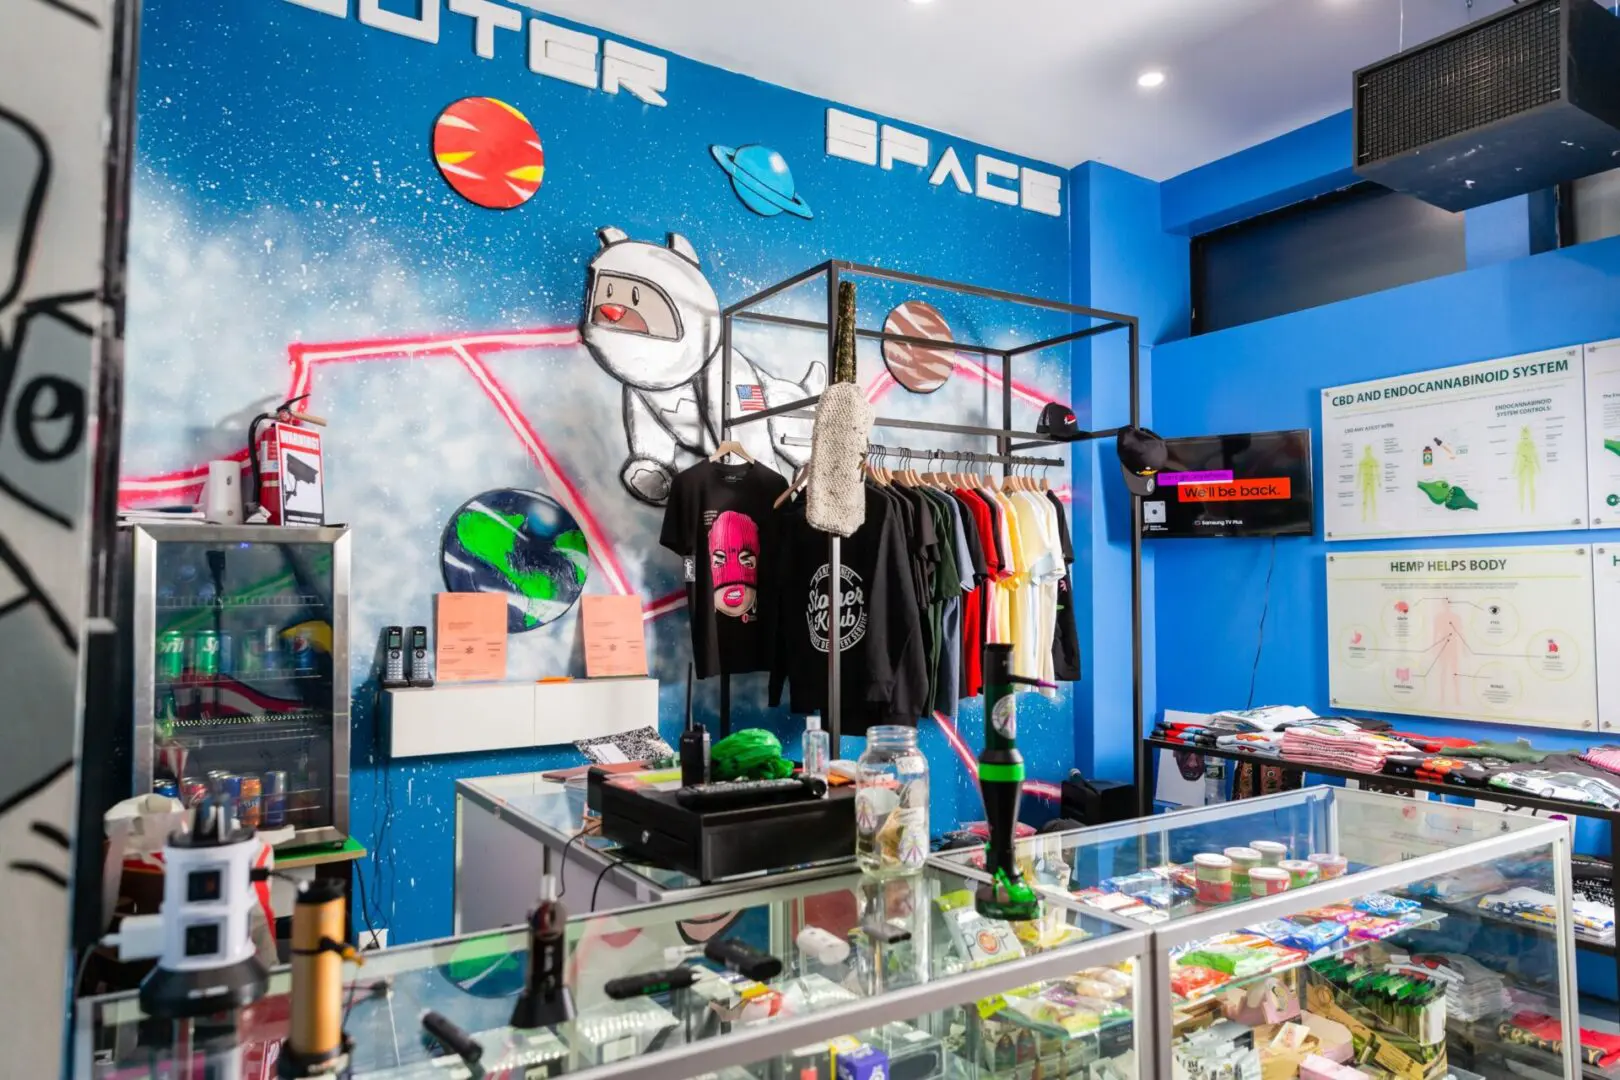 Browse Photo Gallery - Paint Puff N Peace Gaming Lounge